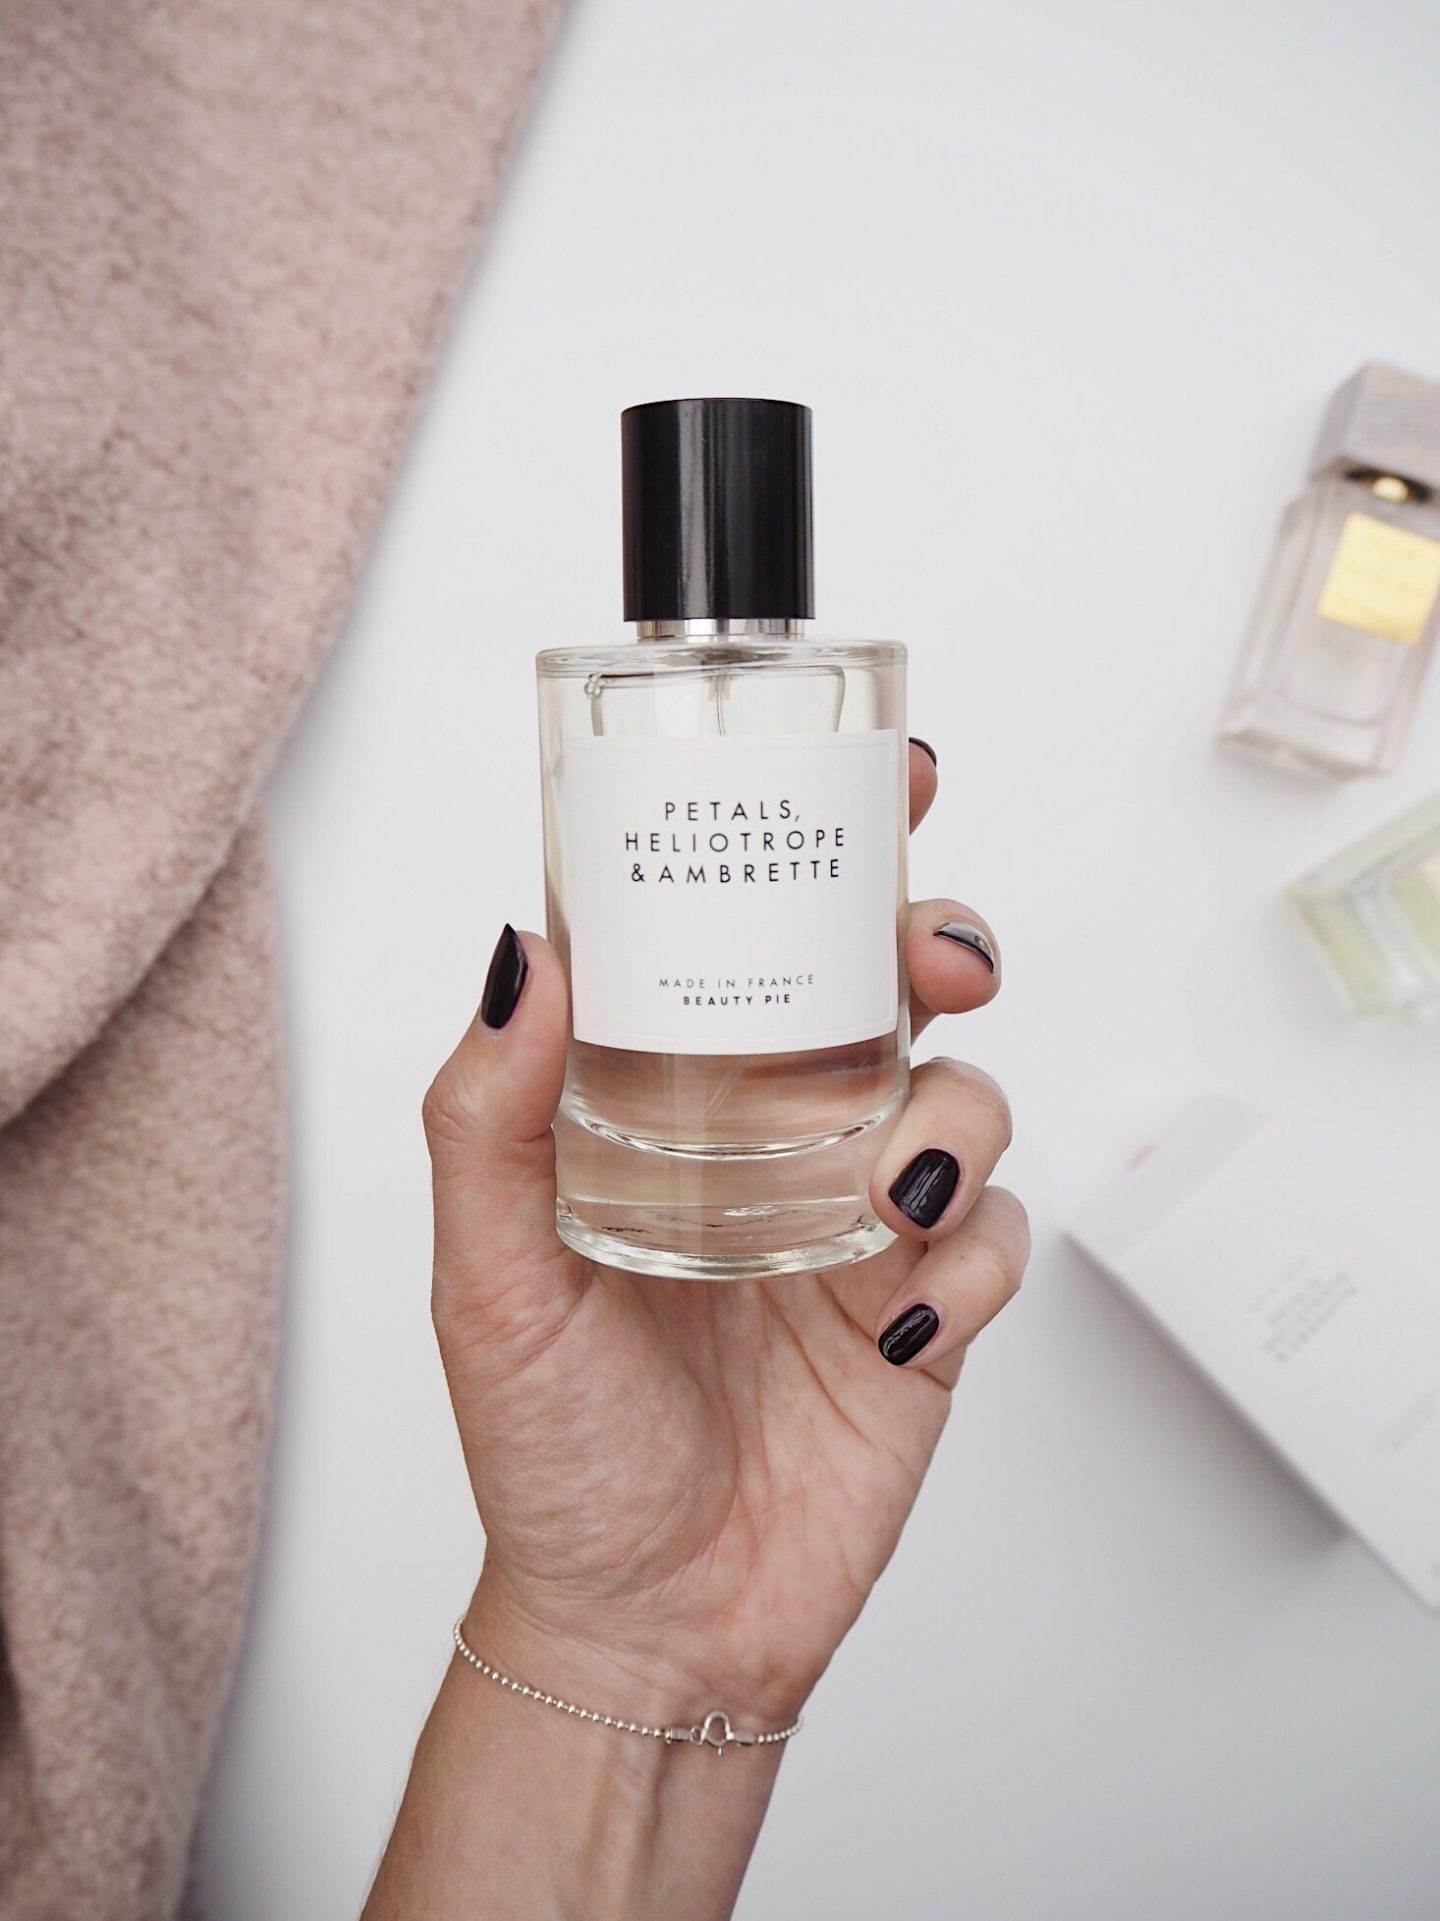 Beauty Pie Fragrance Review